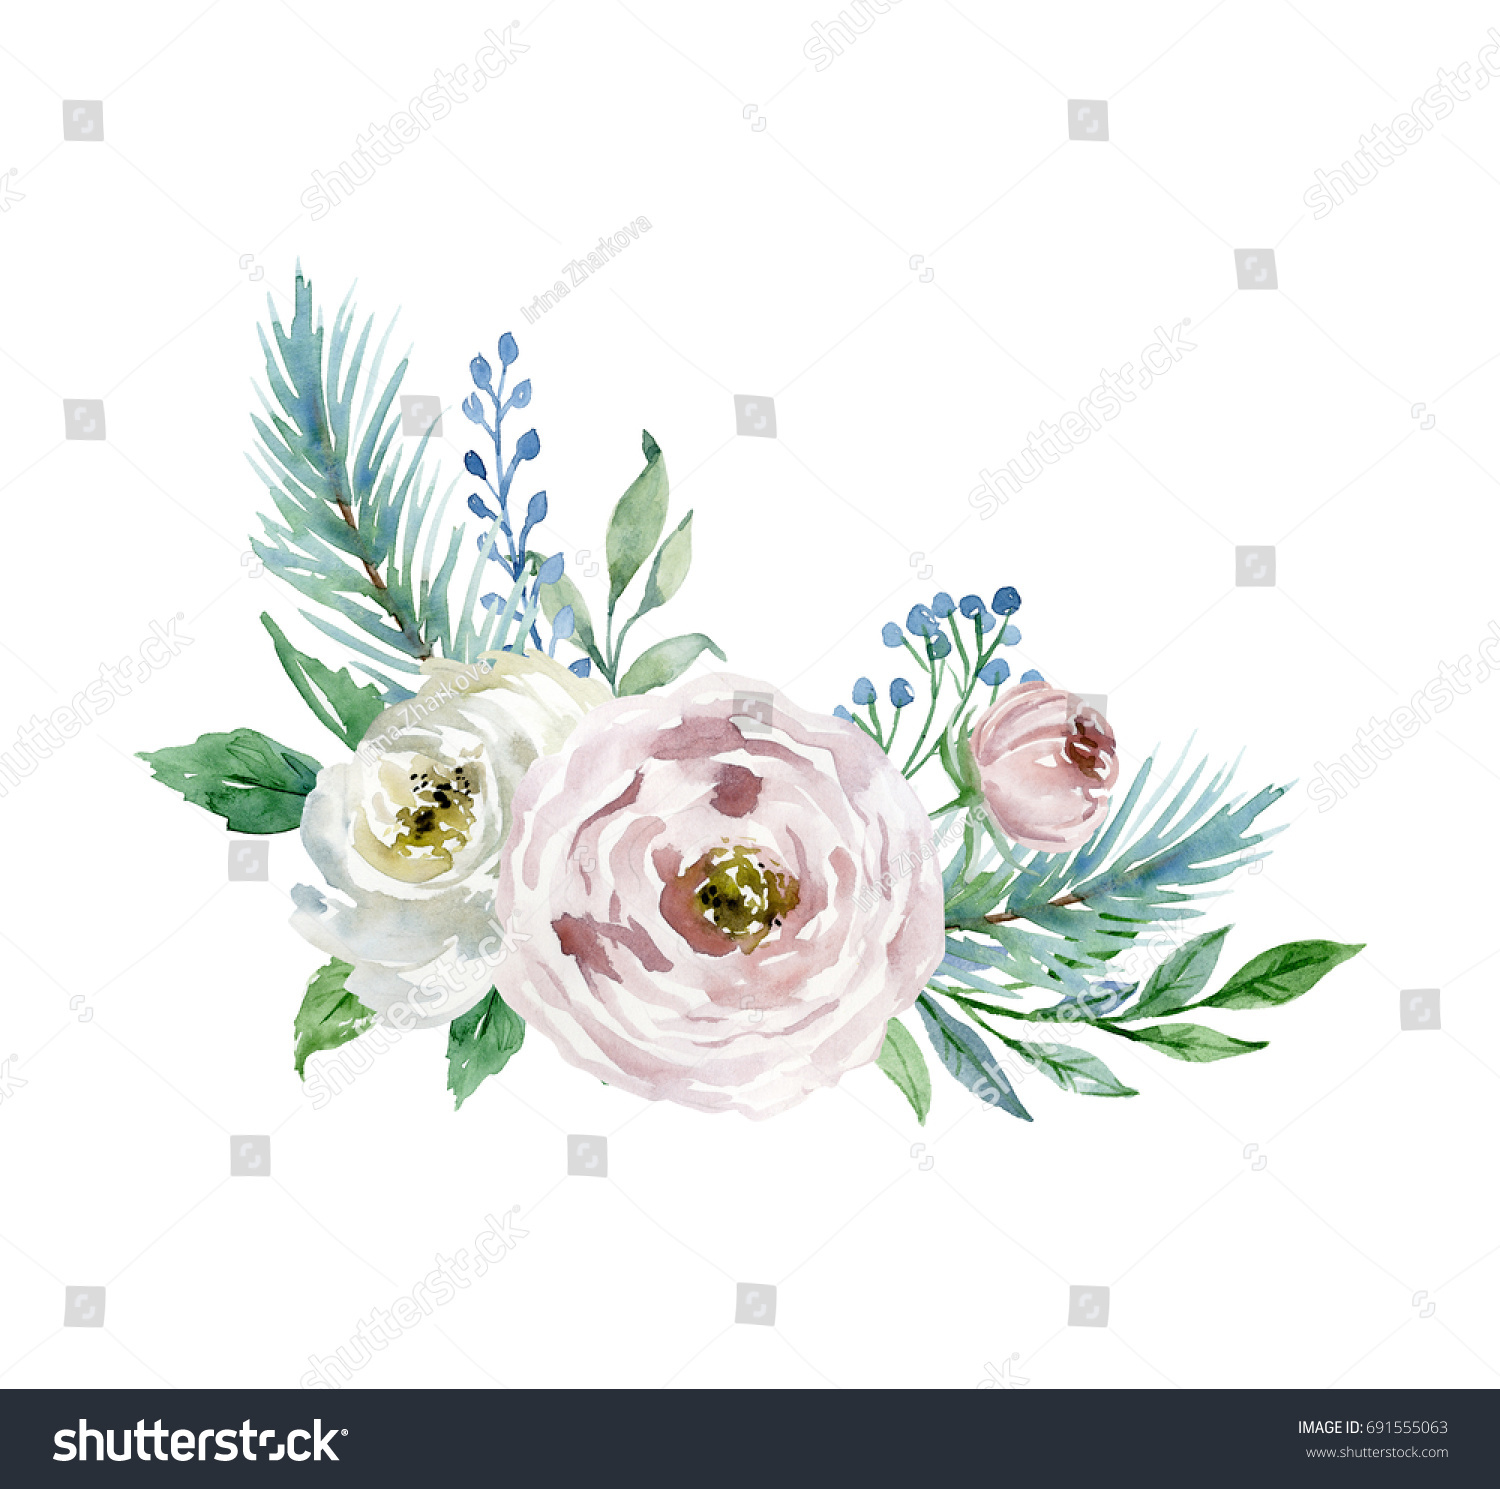 Painted watercolor composition of flowers. Element for design. Greeting card. Valentine's Day, Mother's Day, Wedding, Birthday #691555063